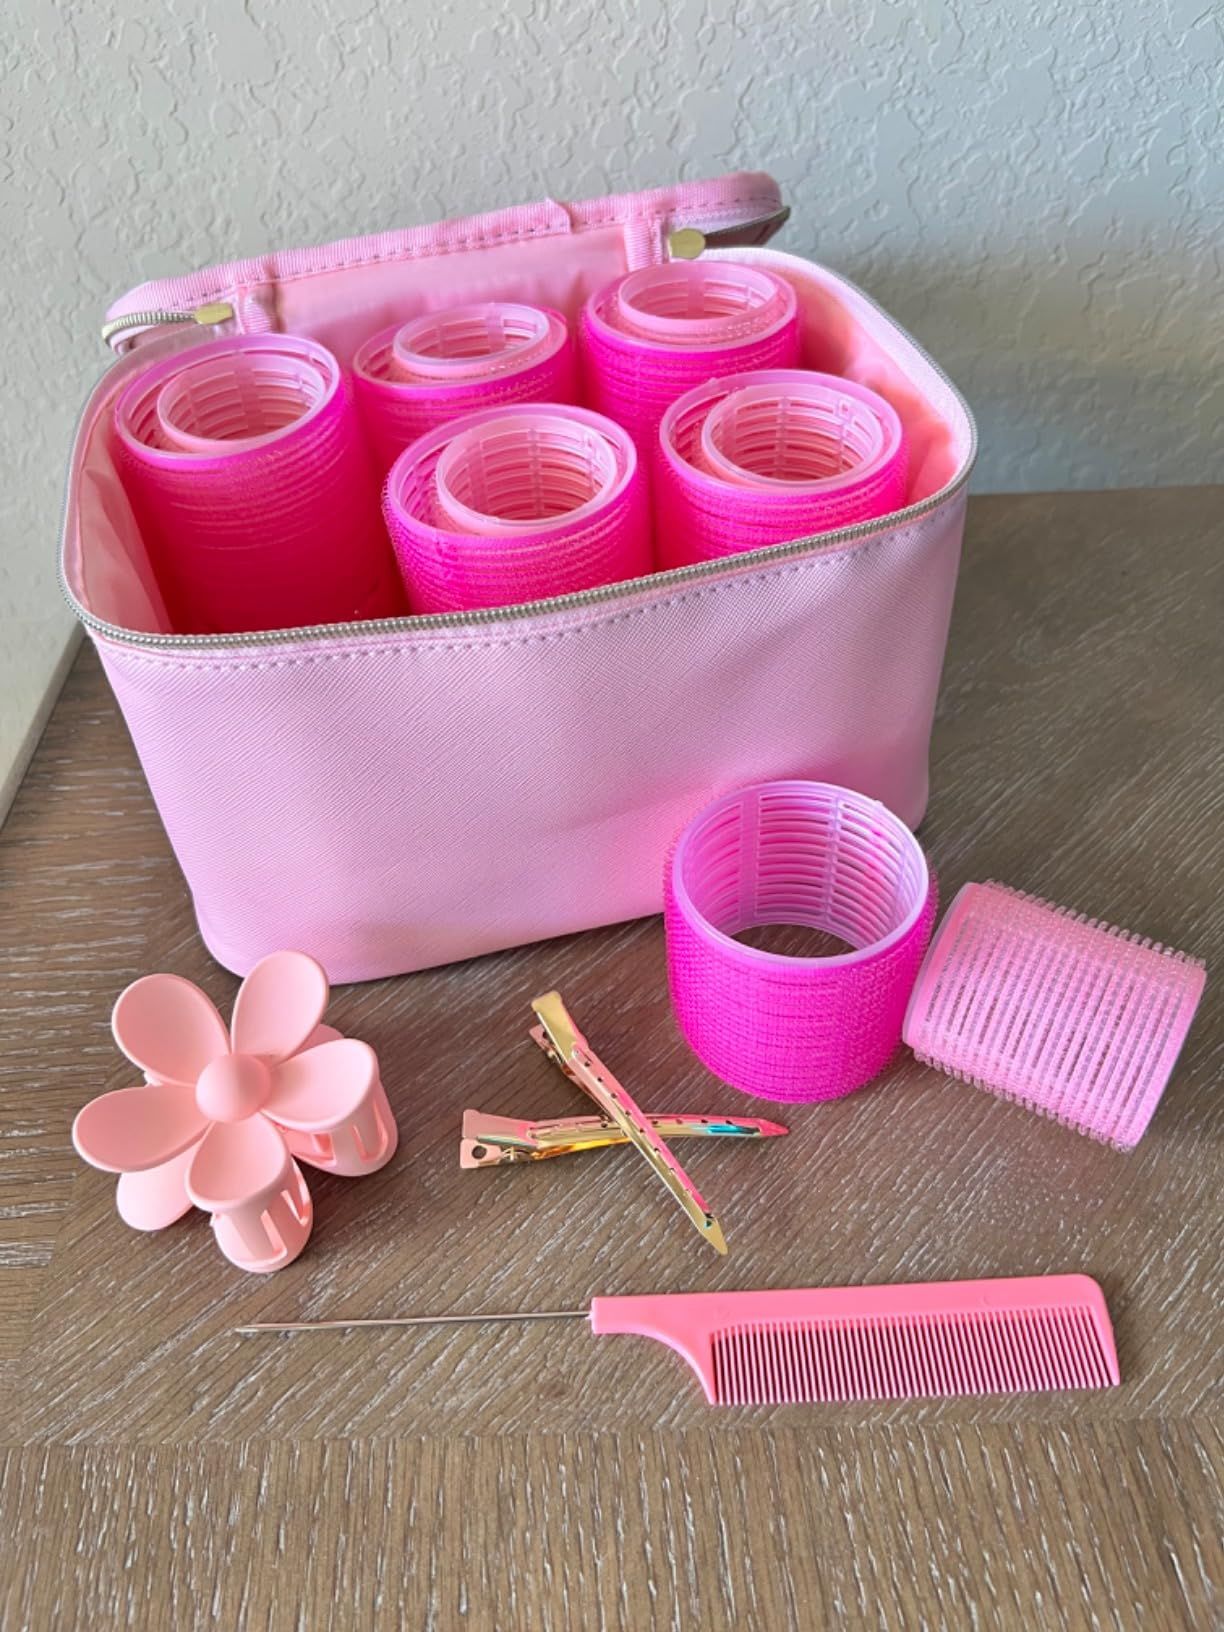 Hair Rollers - Awesome Makeup Carrying Case - Jumbo,Large Rollers Hair Curlers Set for Volume, Lo... | Amazon (US)